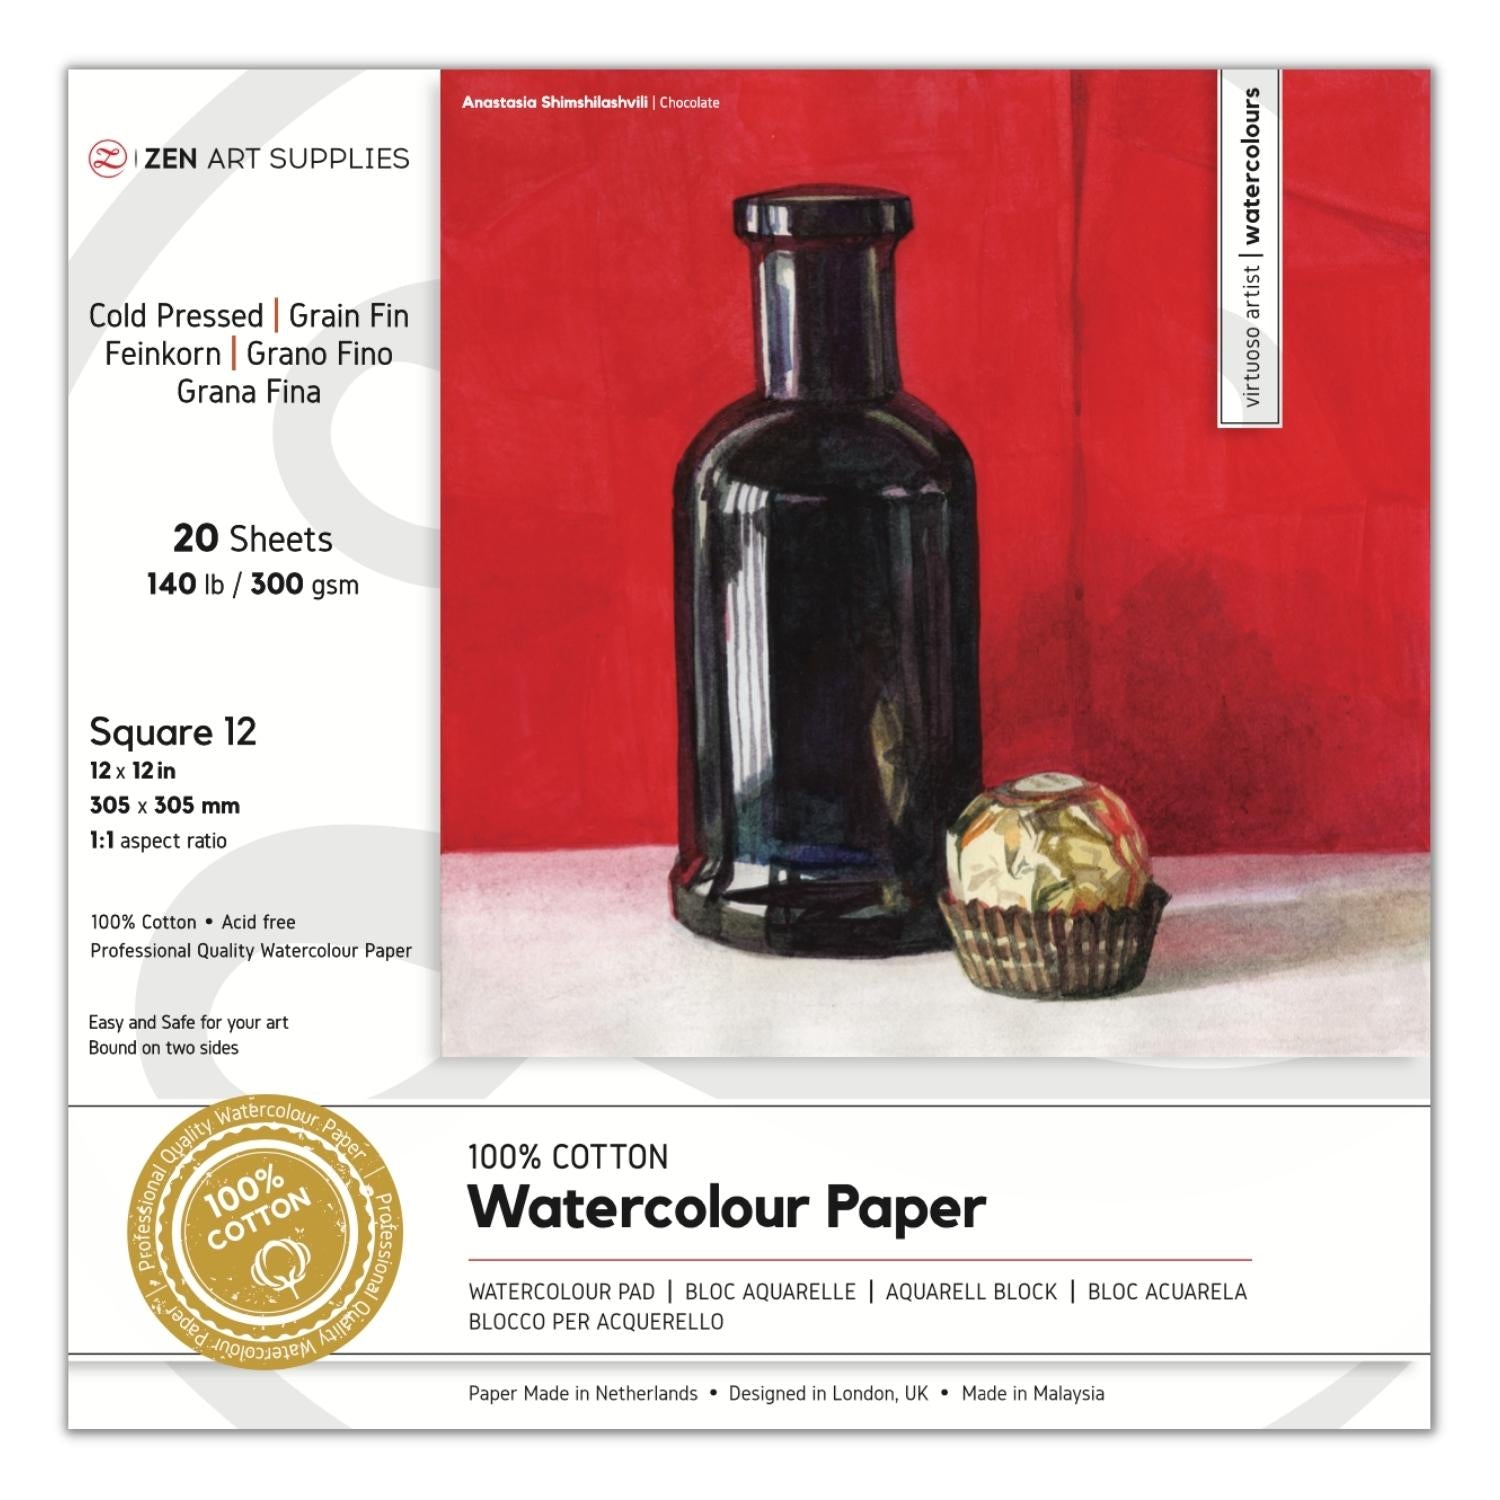 Hot and Cold Press Watercolor Paper Sample Sets 100% Cotton Professional /  Artist Grade 